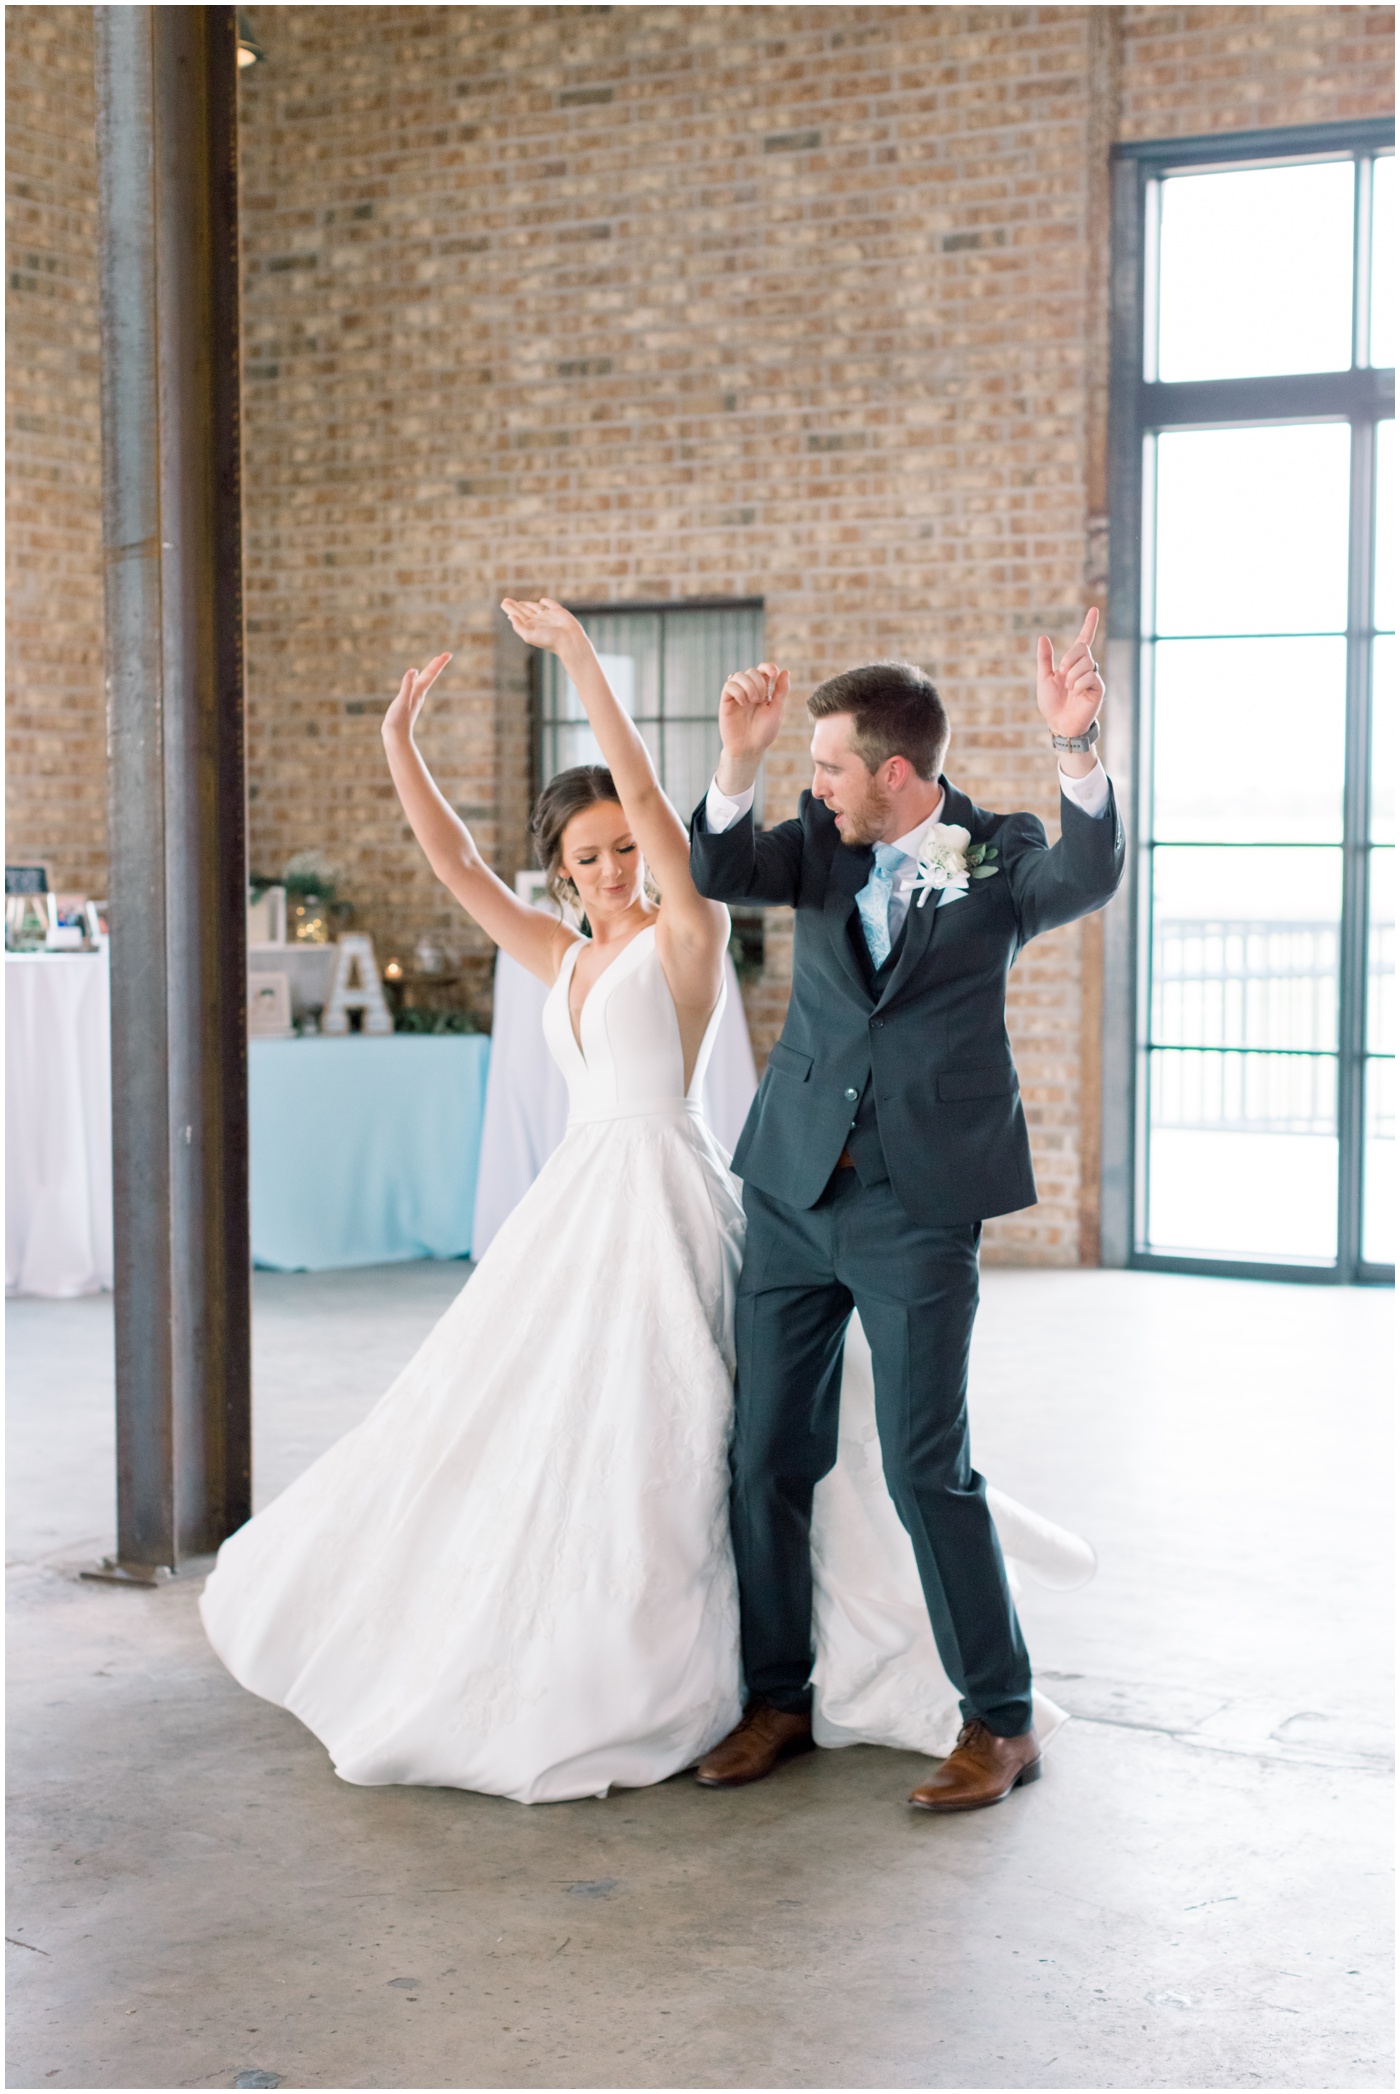 bride and groom bump hips during grand entrance